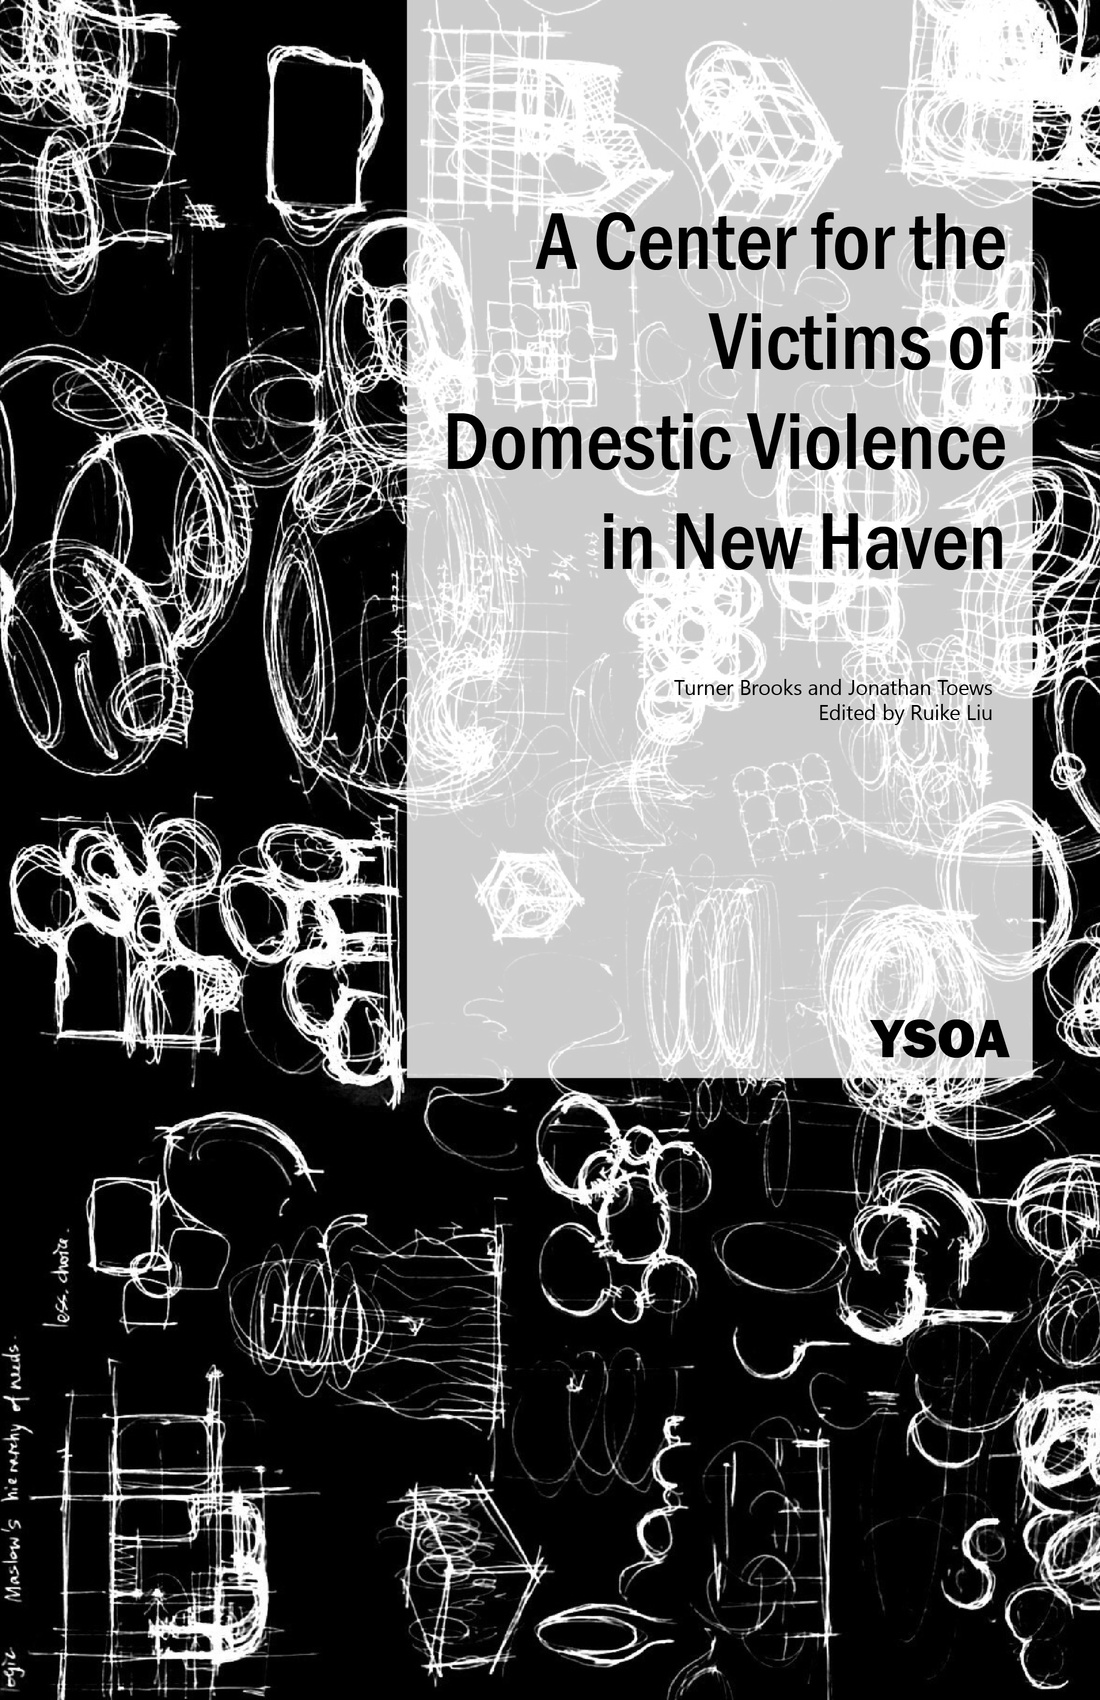 A center for Victims of Domestic Violence in New Haven